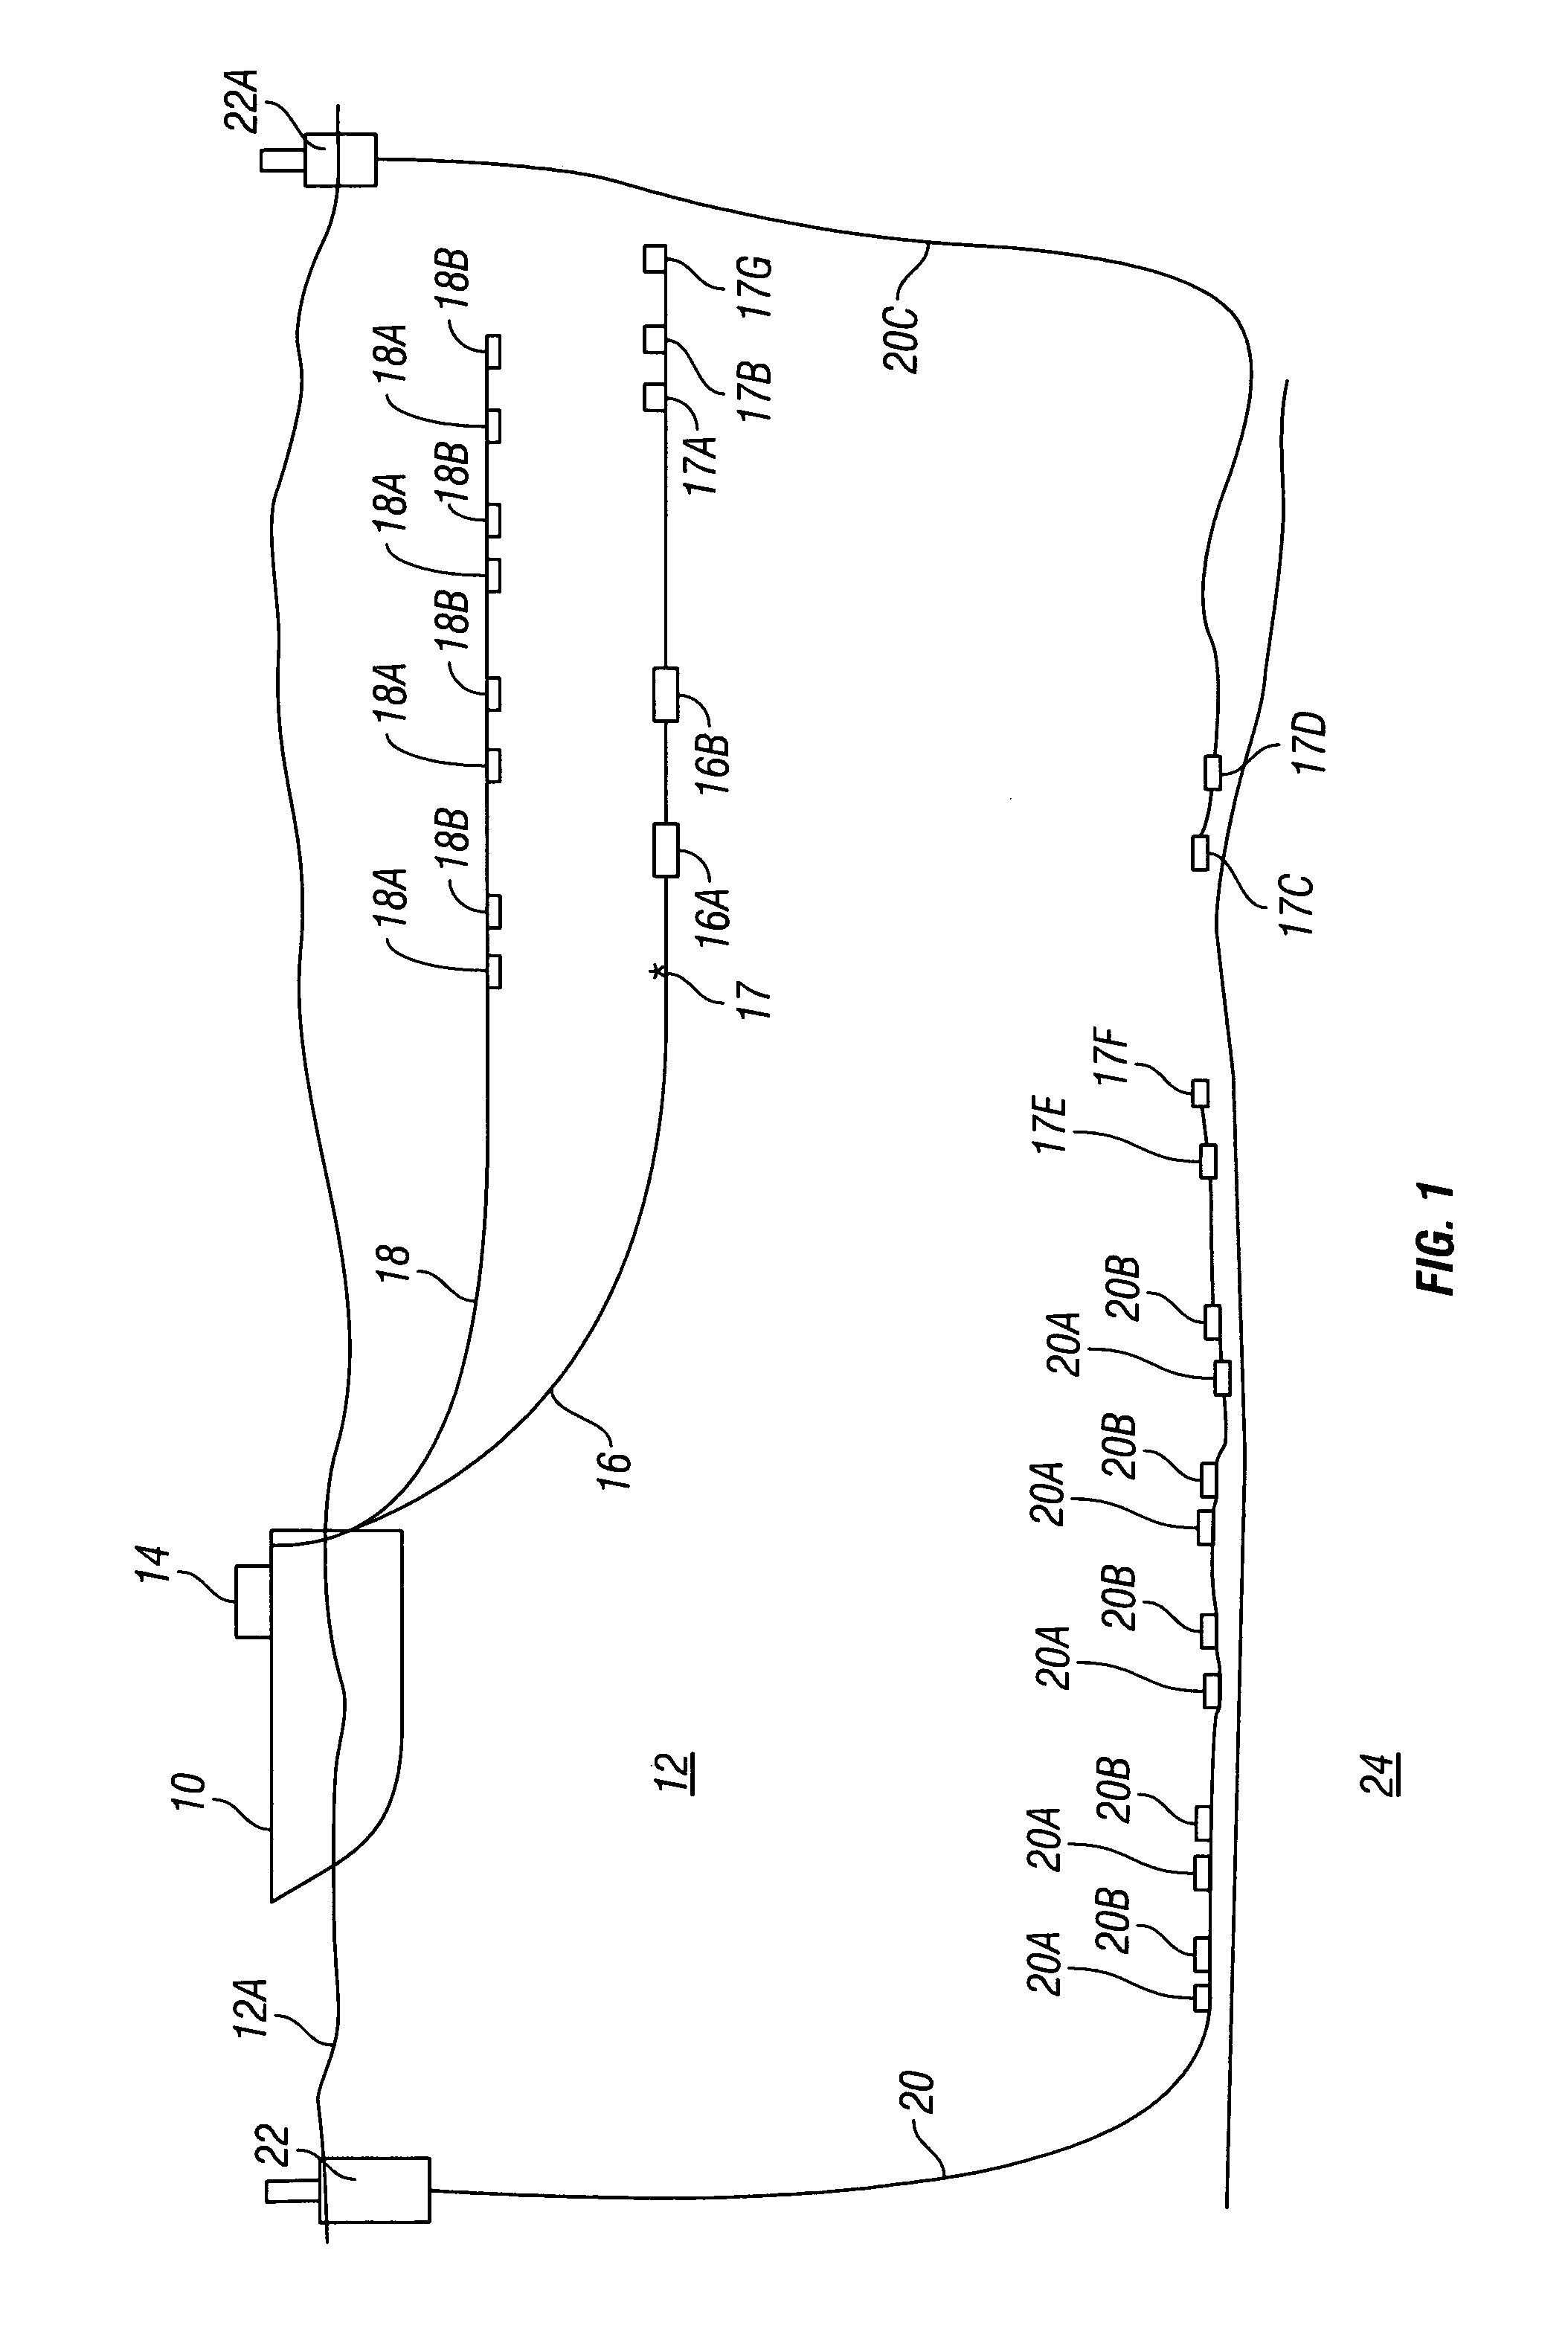 Method for acquiring controlled source electromagnetic survey data to assist in attenuating correlated noise